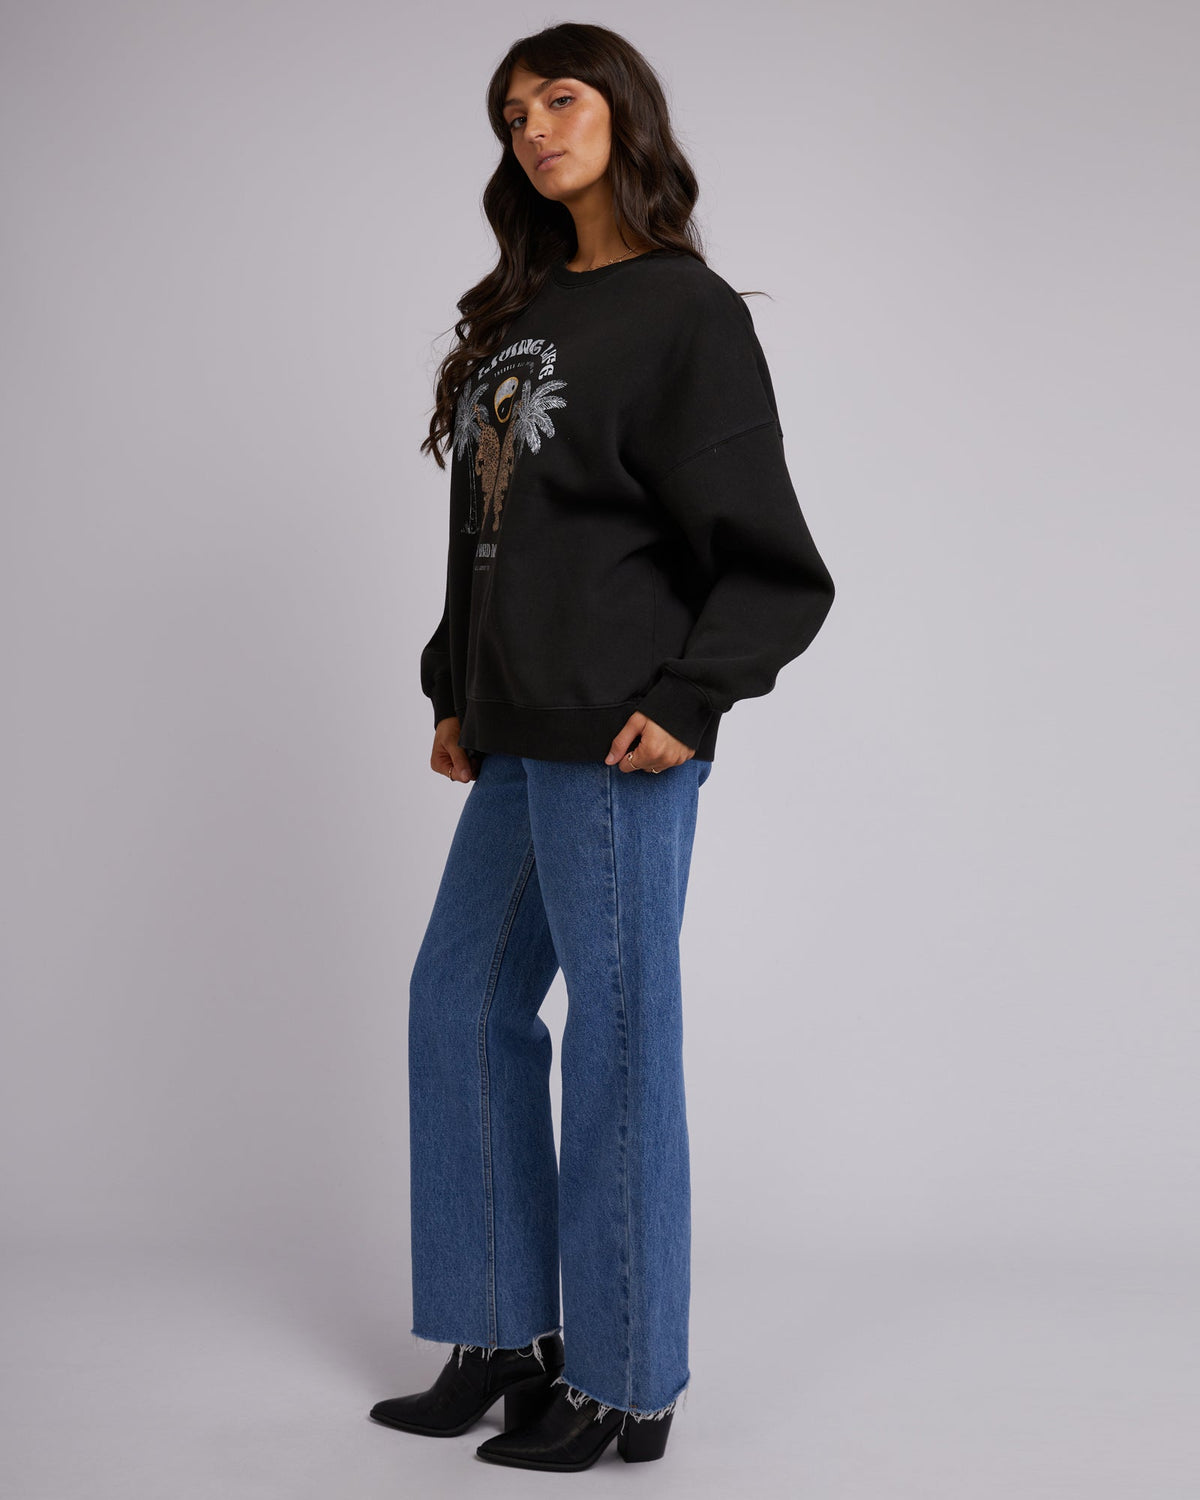 All About Eve-Living Life Oversized Crew Washed Black-Edge Clothing